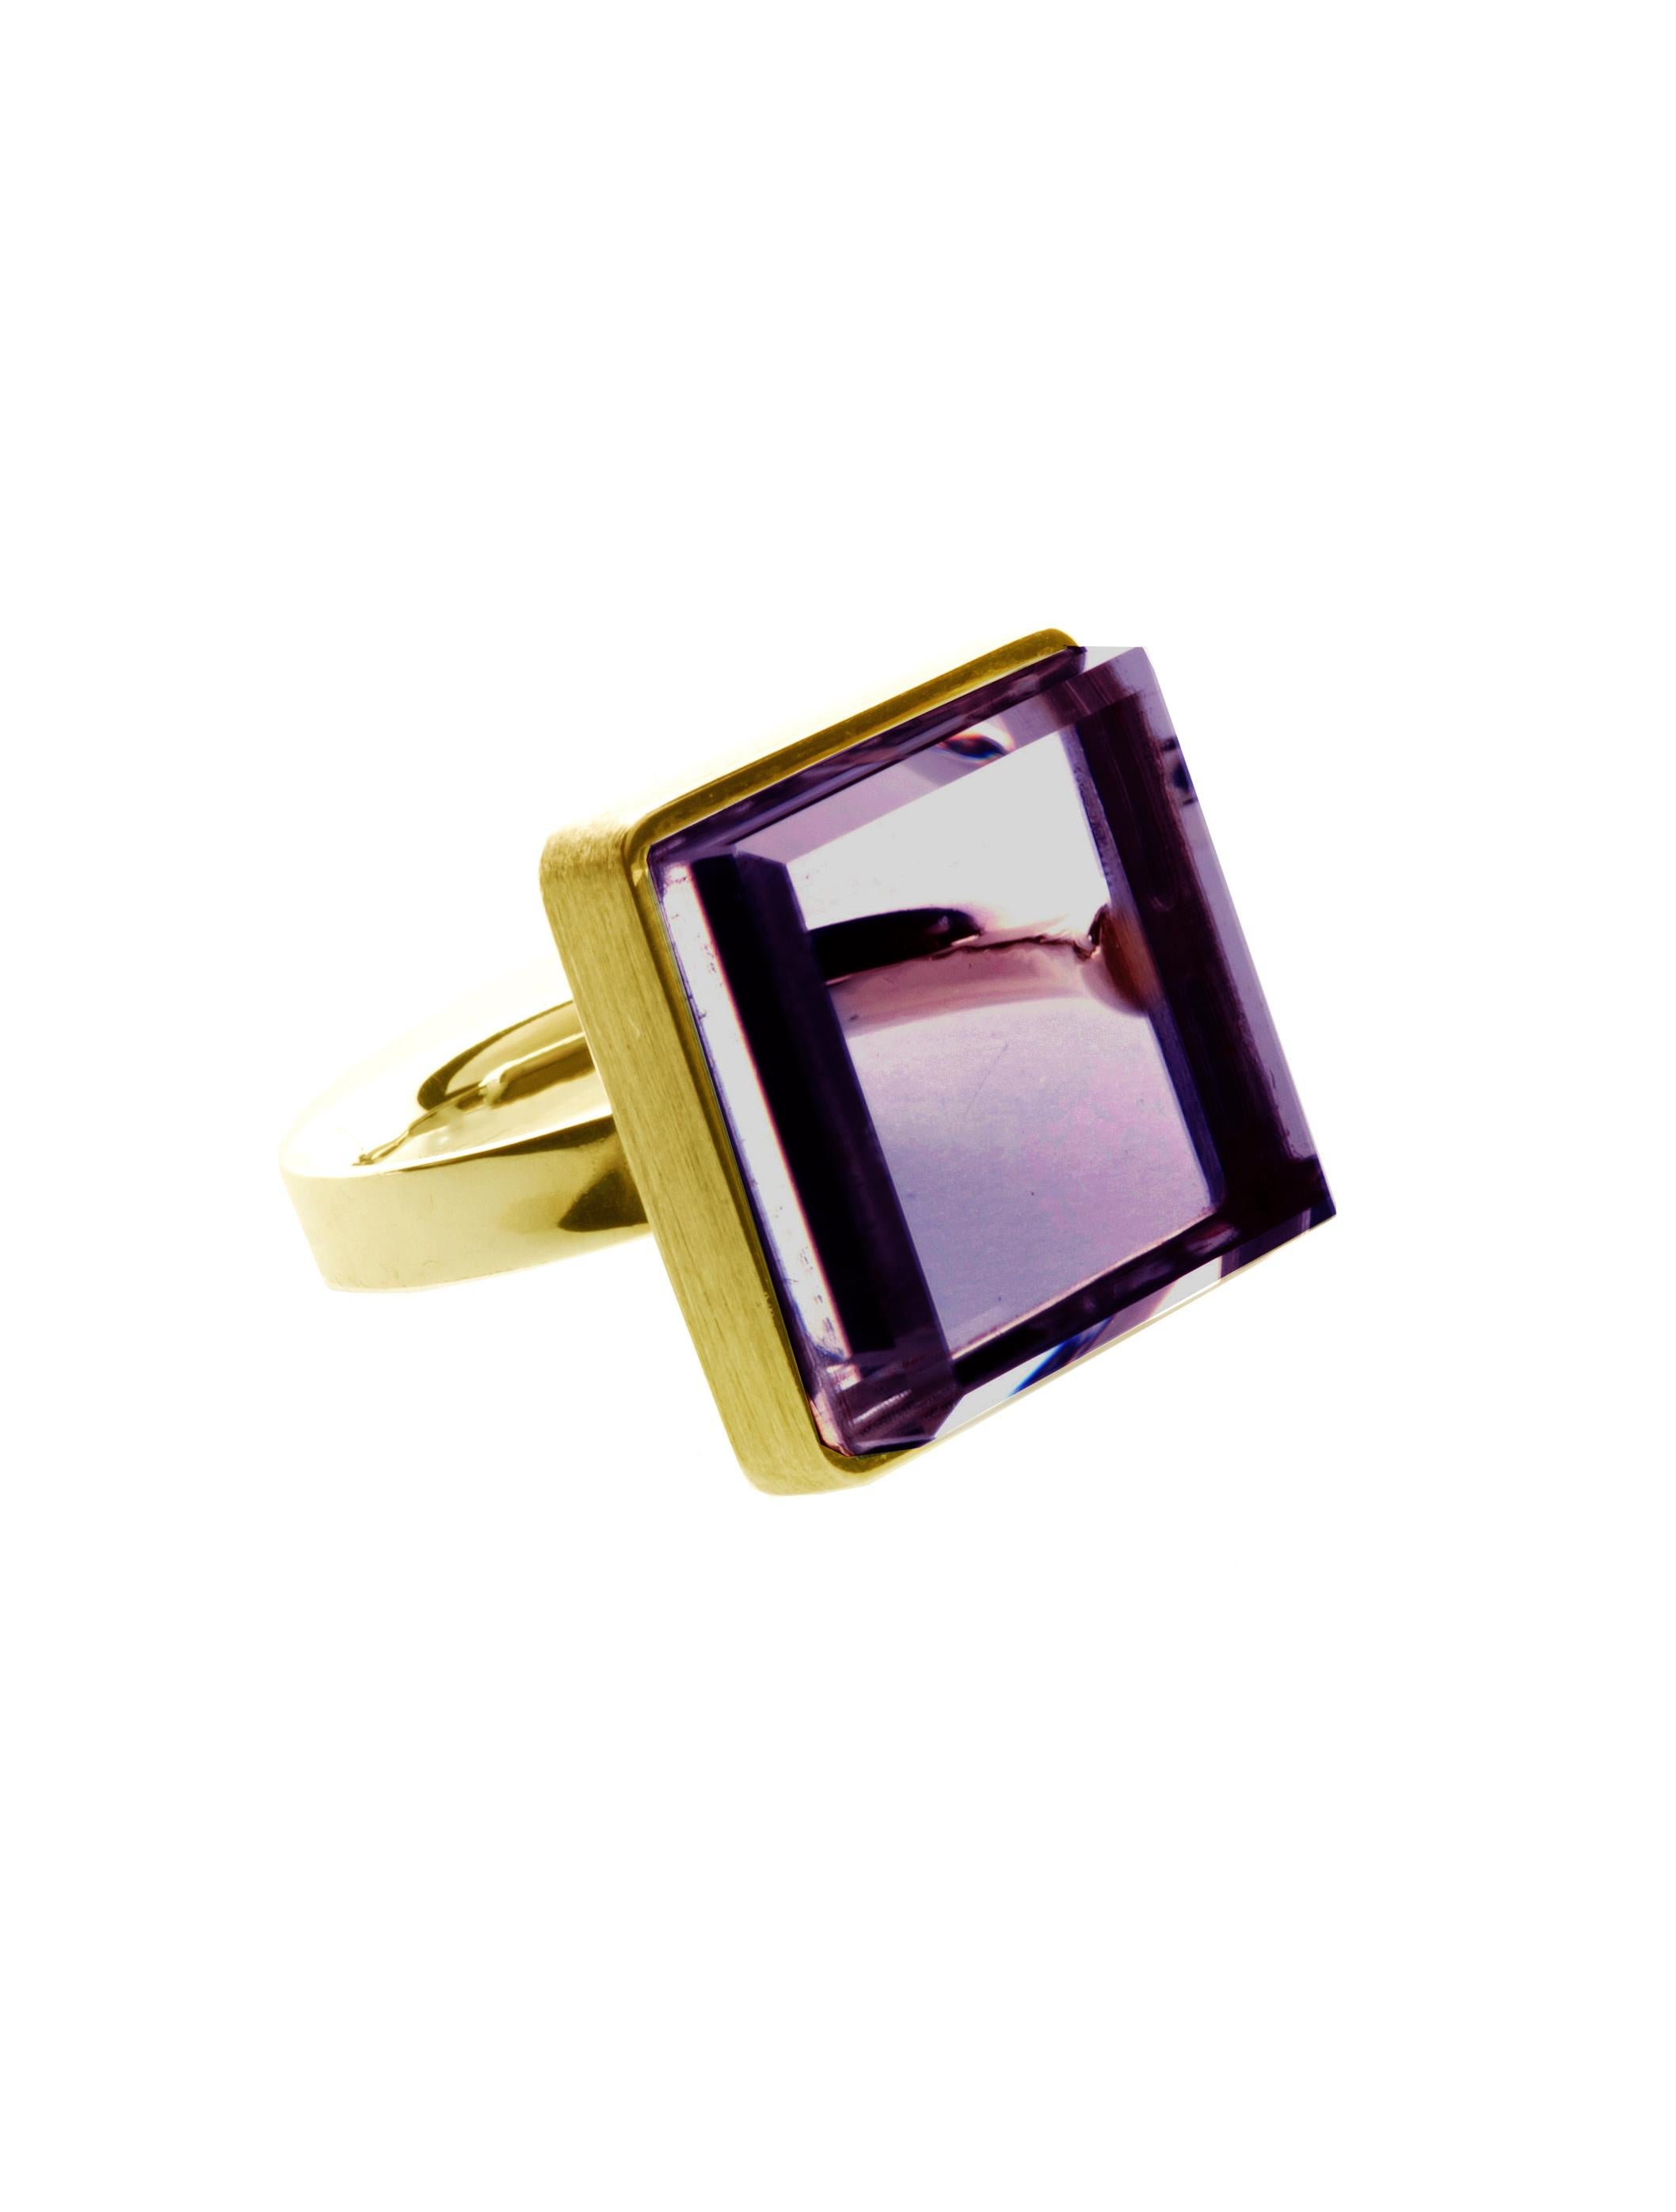 This Art Deco-style men's ring features a 15x15x8mm amethyst set in 18-karat rose gold. It has been featured in Harper's Bazaar and Vogue UA magazines.

Reflecting the Art Deco spirit, this ring is suitable for both women and men, and it inspires